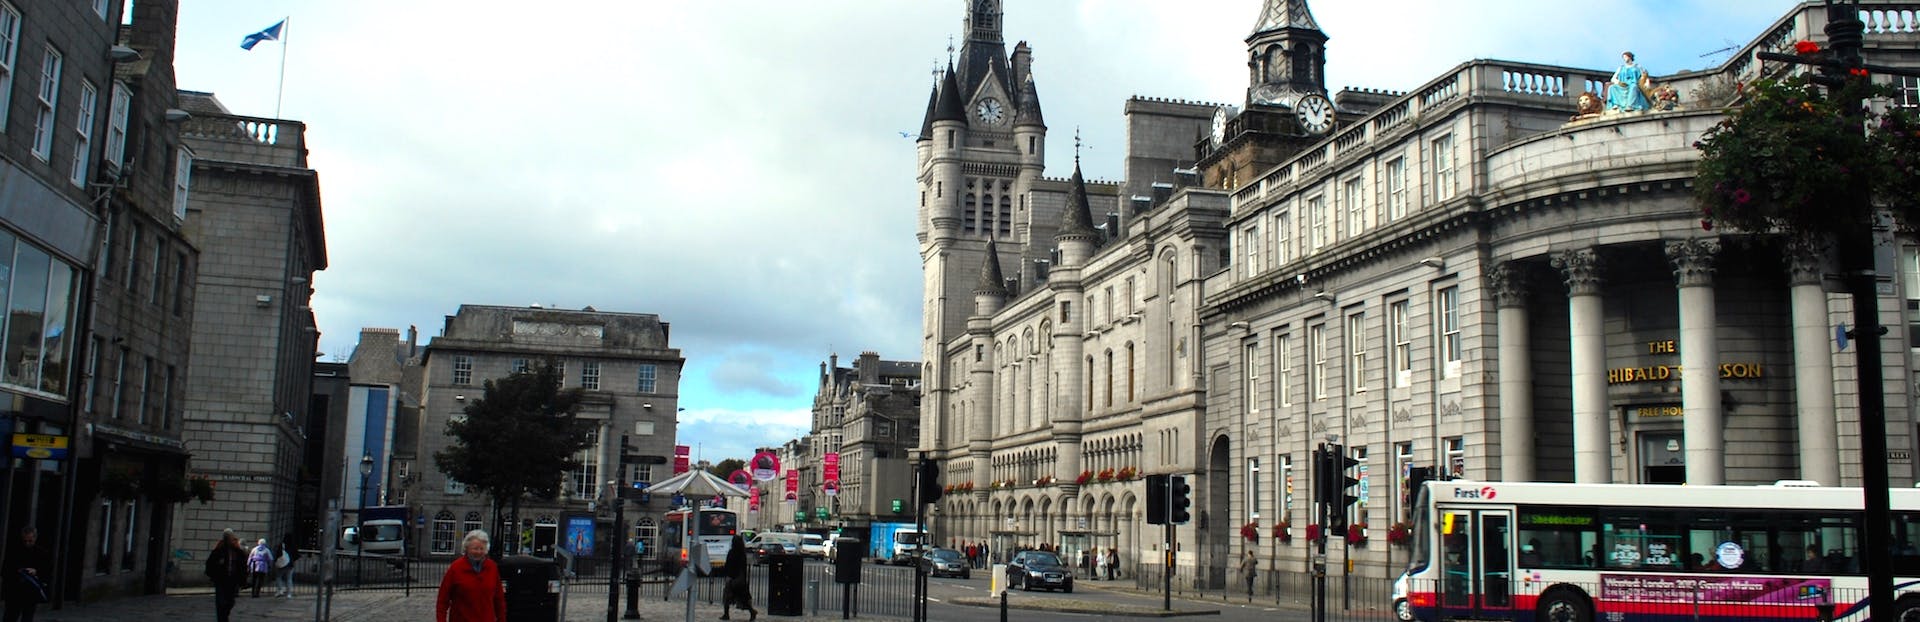 Discover the dark side of Aberdeen on a self-guided audio tour